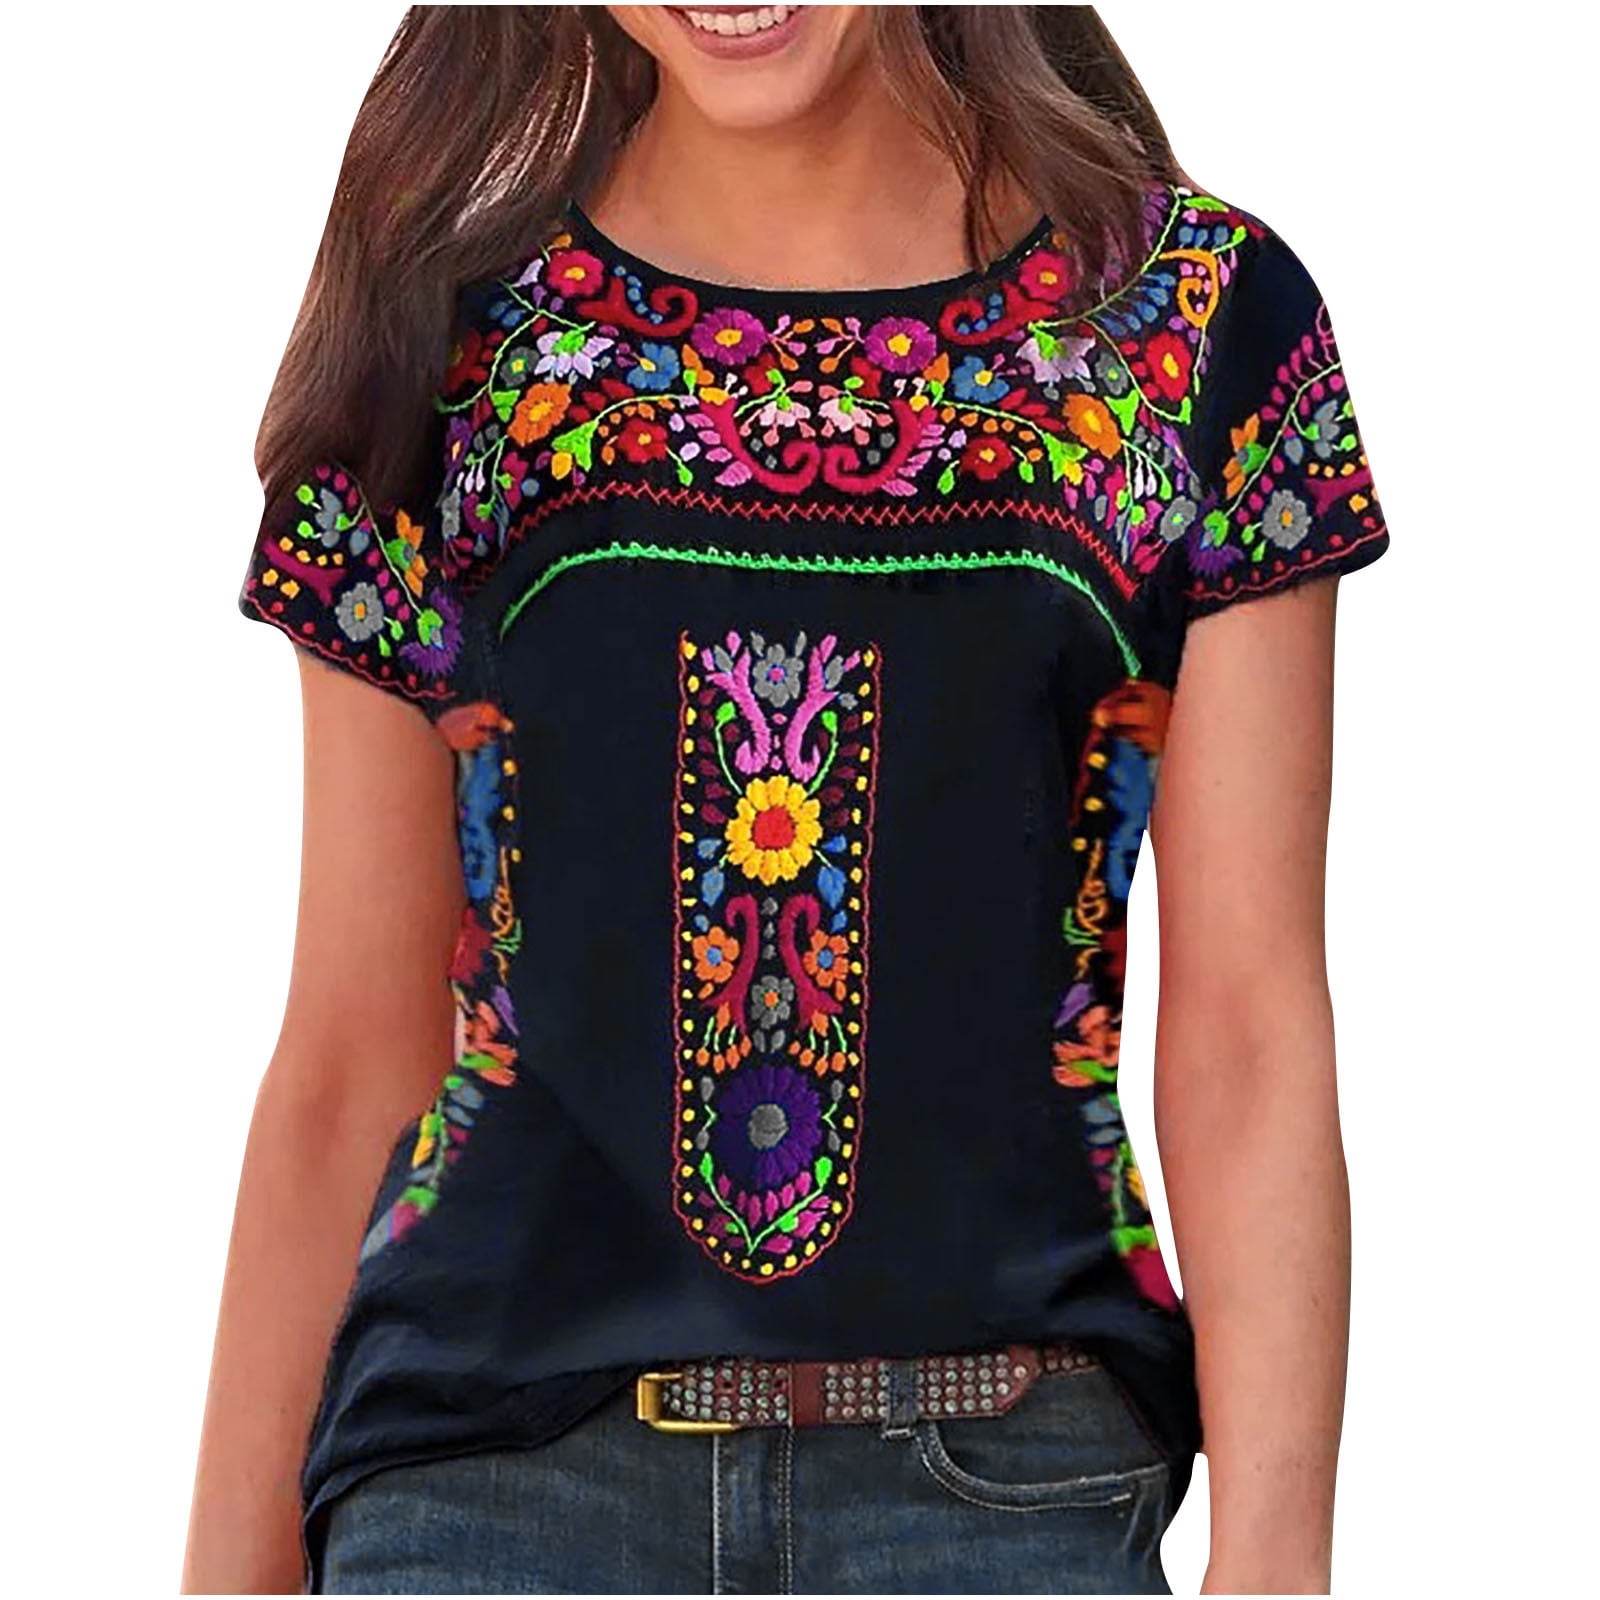 Yyeselk Women's Embroidered Mexican Peasant Blouses Mexico Summer Shirt ...